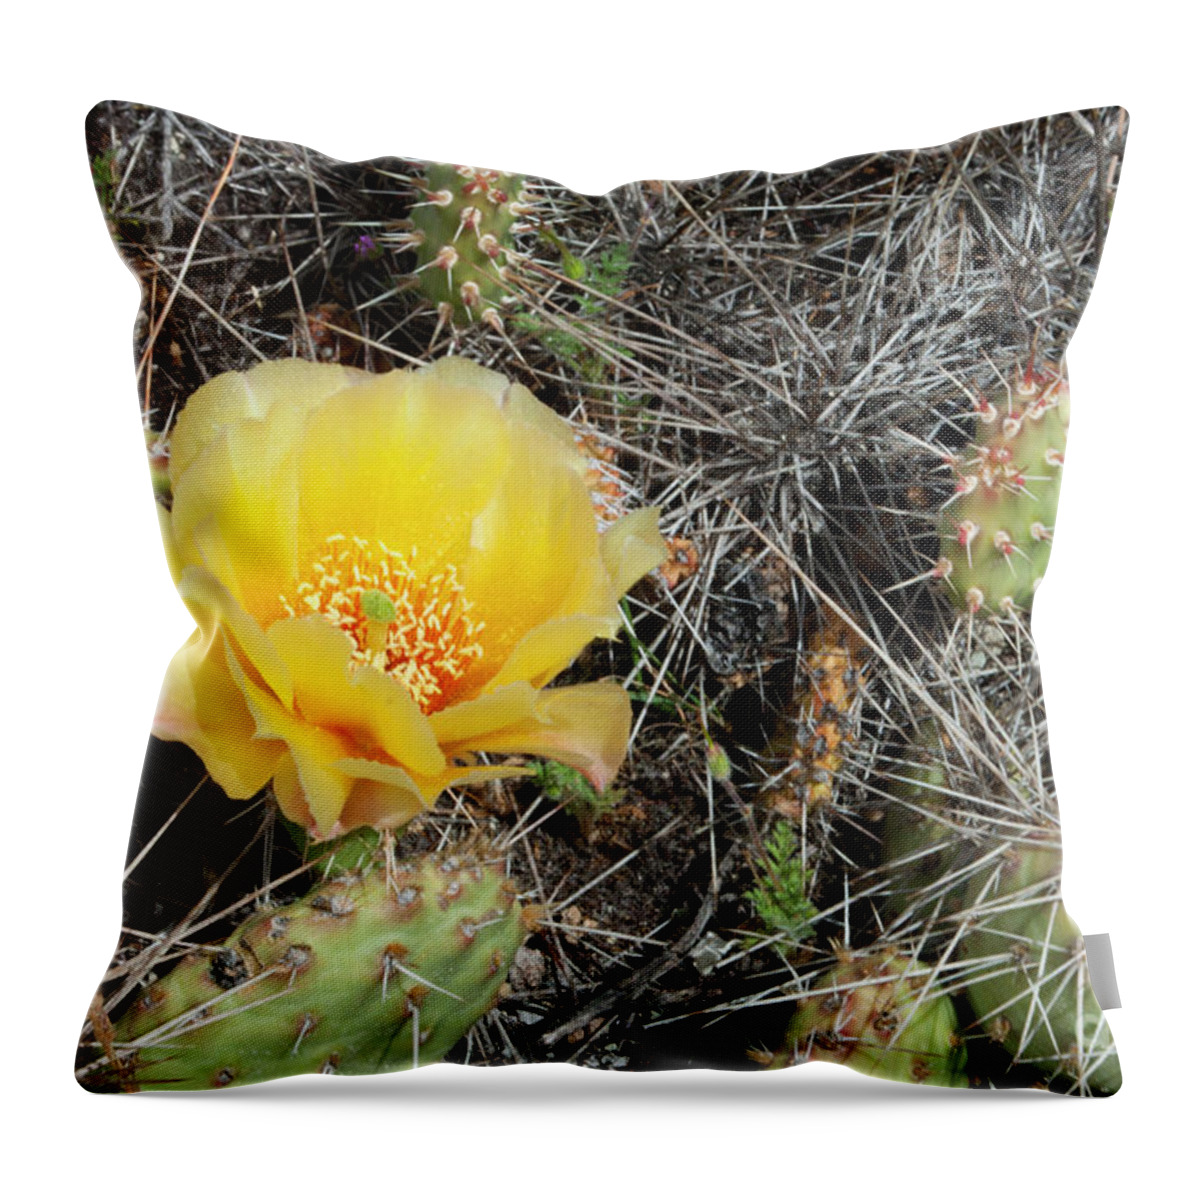 Flower Throw Pillow featuring the photograph Yellow Prickly Pear by Julia McHugh